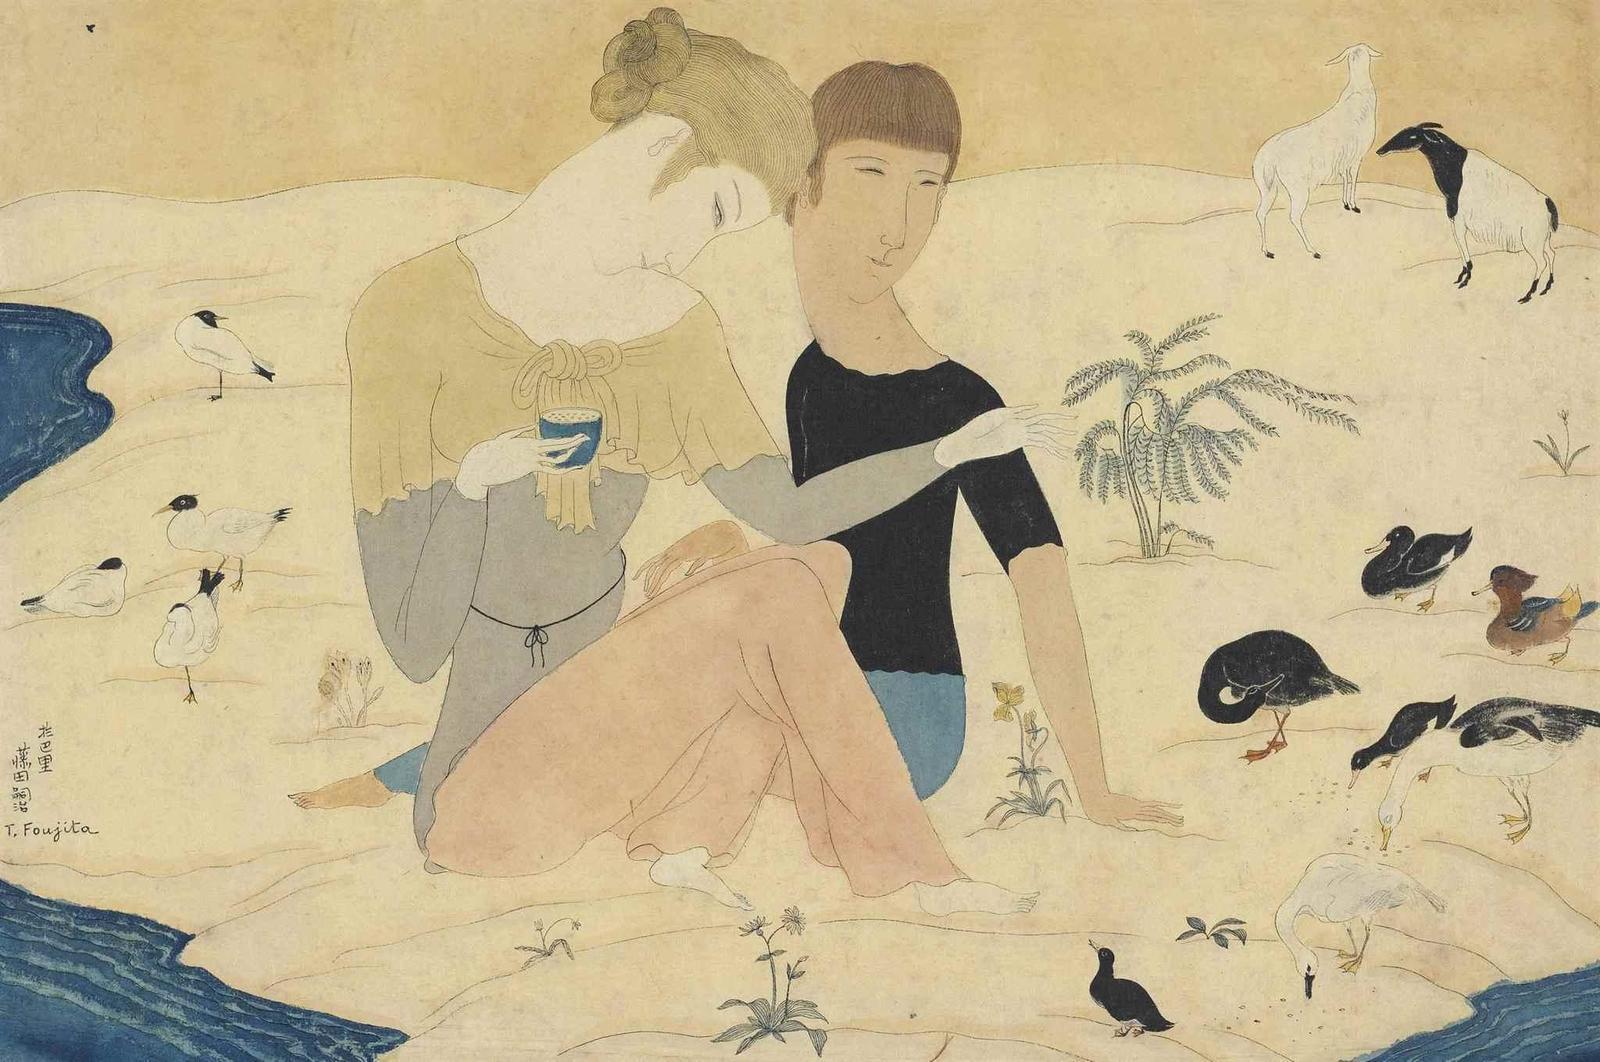 Tsuguharu Foujita, Young Couple and Animals, 1917. Watercolor, pen and ink on paper.